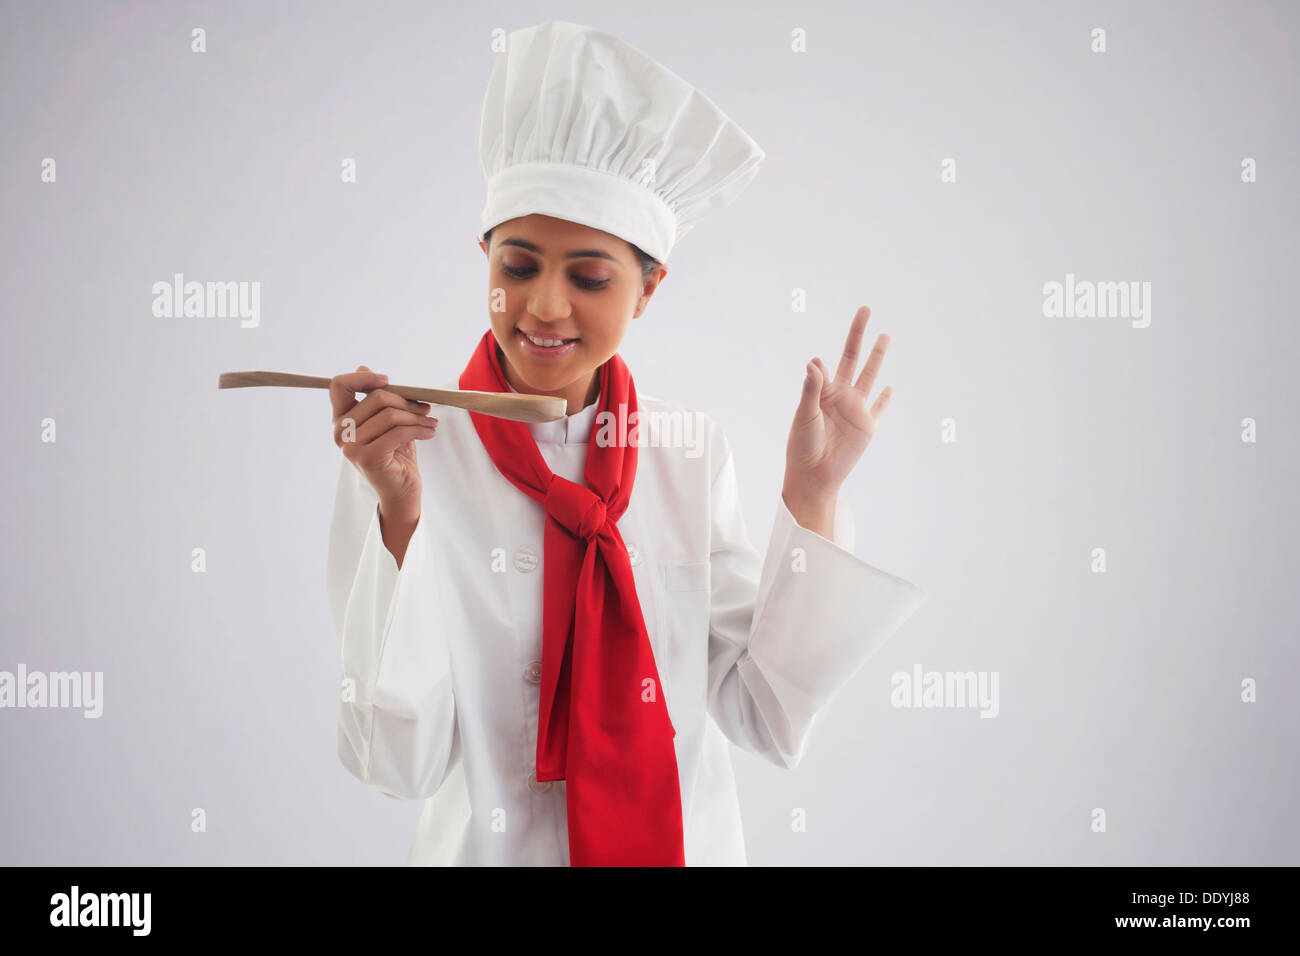 Female chef tasting food isolated over gray background Stock Photo